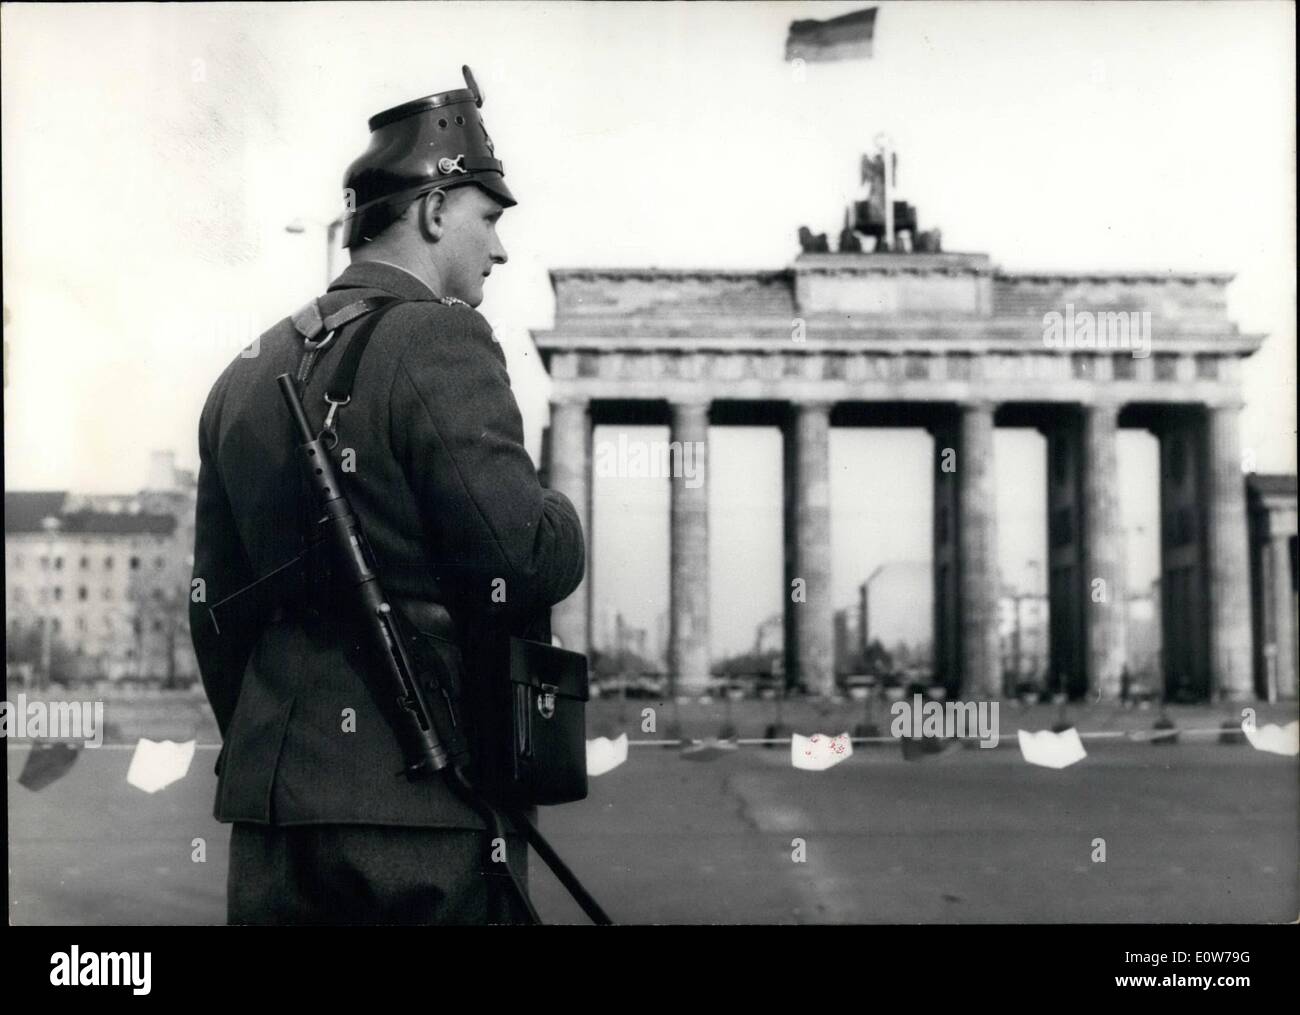 Oct. 10, 1961 - Small machine-guns for the West-Berlin police.: Today the  West-Berlin police get small machine-guns for its service at the Sector and  Zone border. This fact was nessecary why in